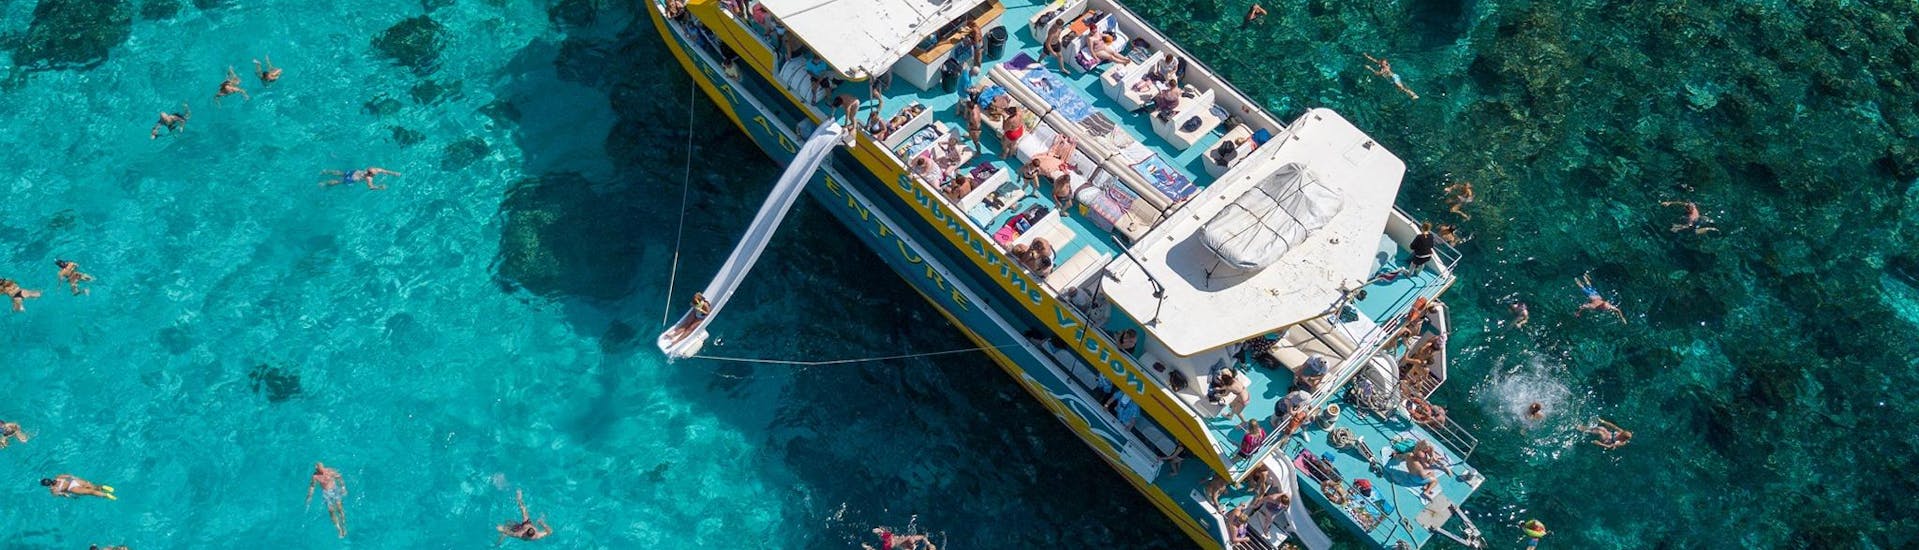 During a catamaran tour with Sea Adventure Excursions in Malta, holidaymakers get to enjoy the clear blue sea of the Crystal Lagoon.